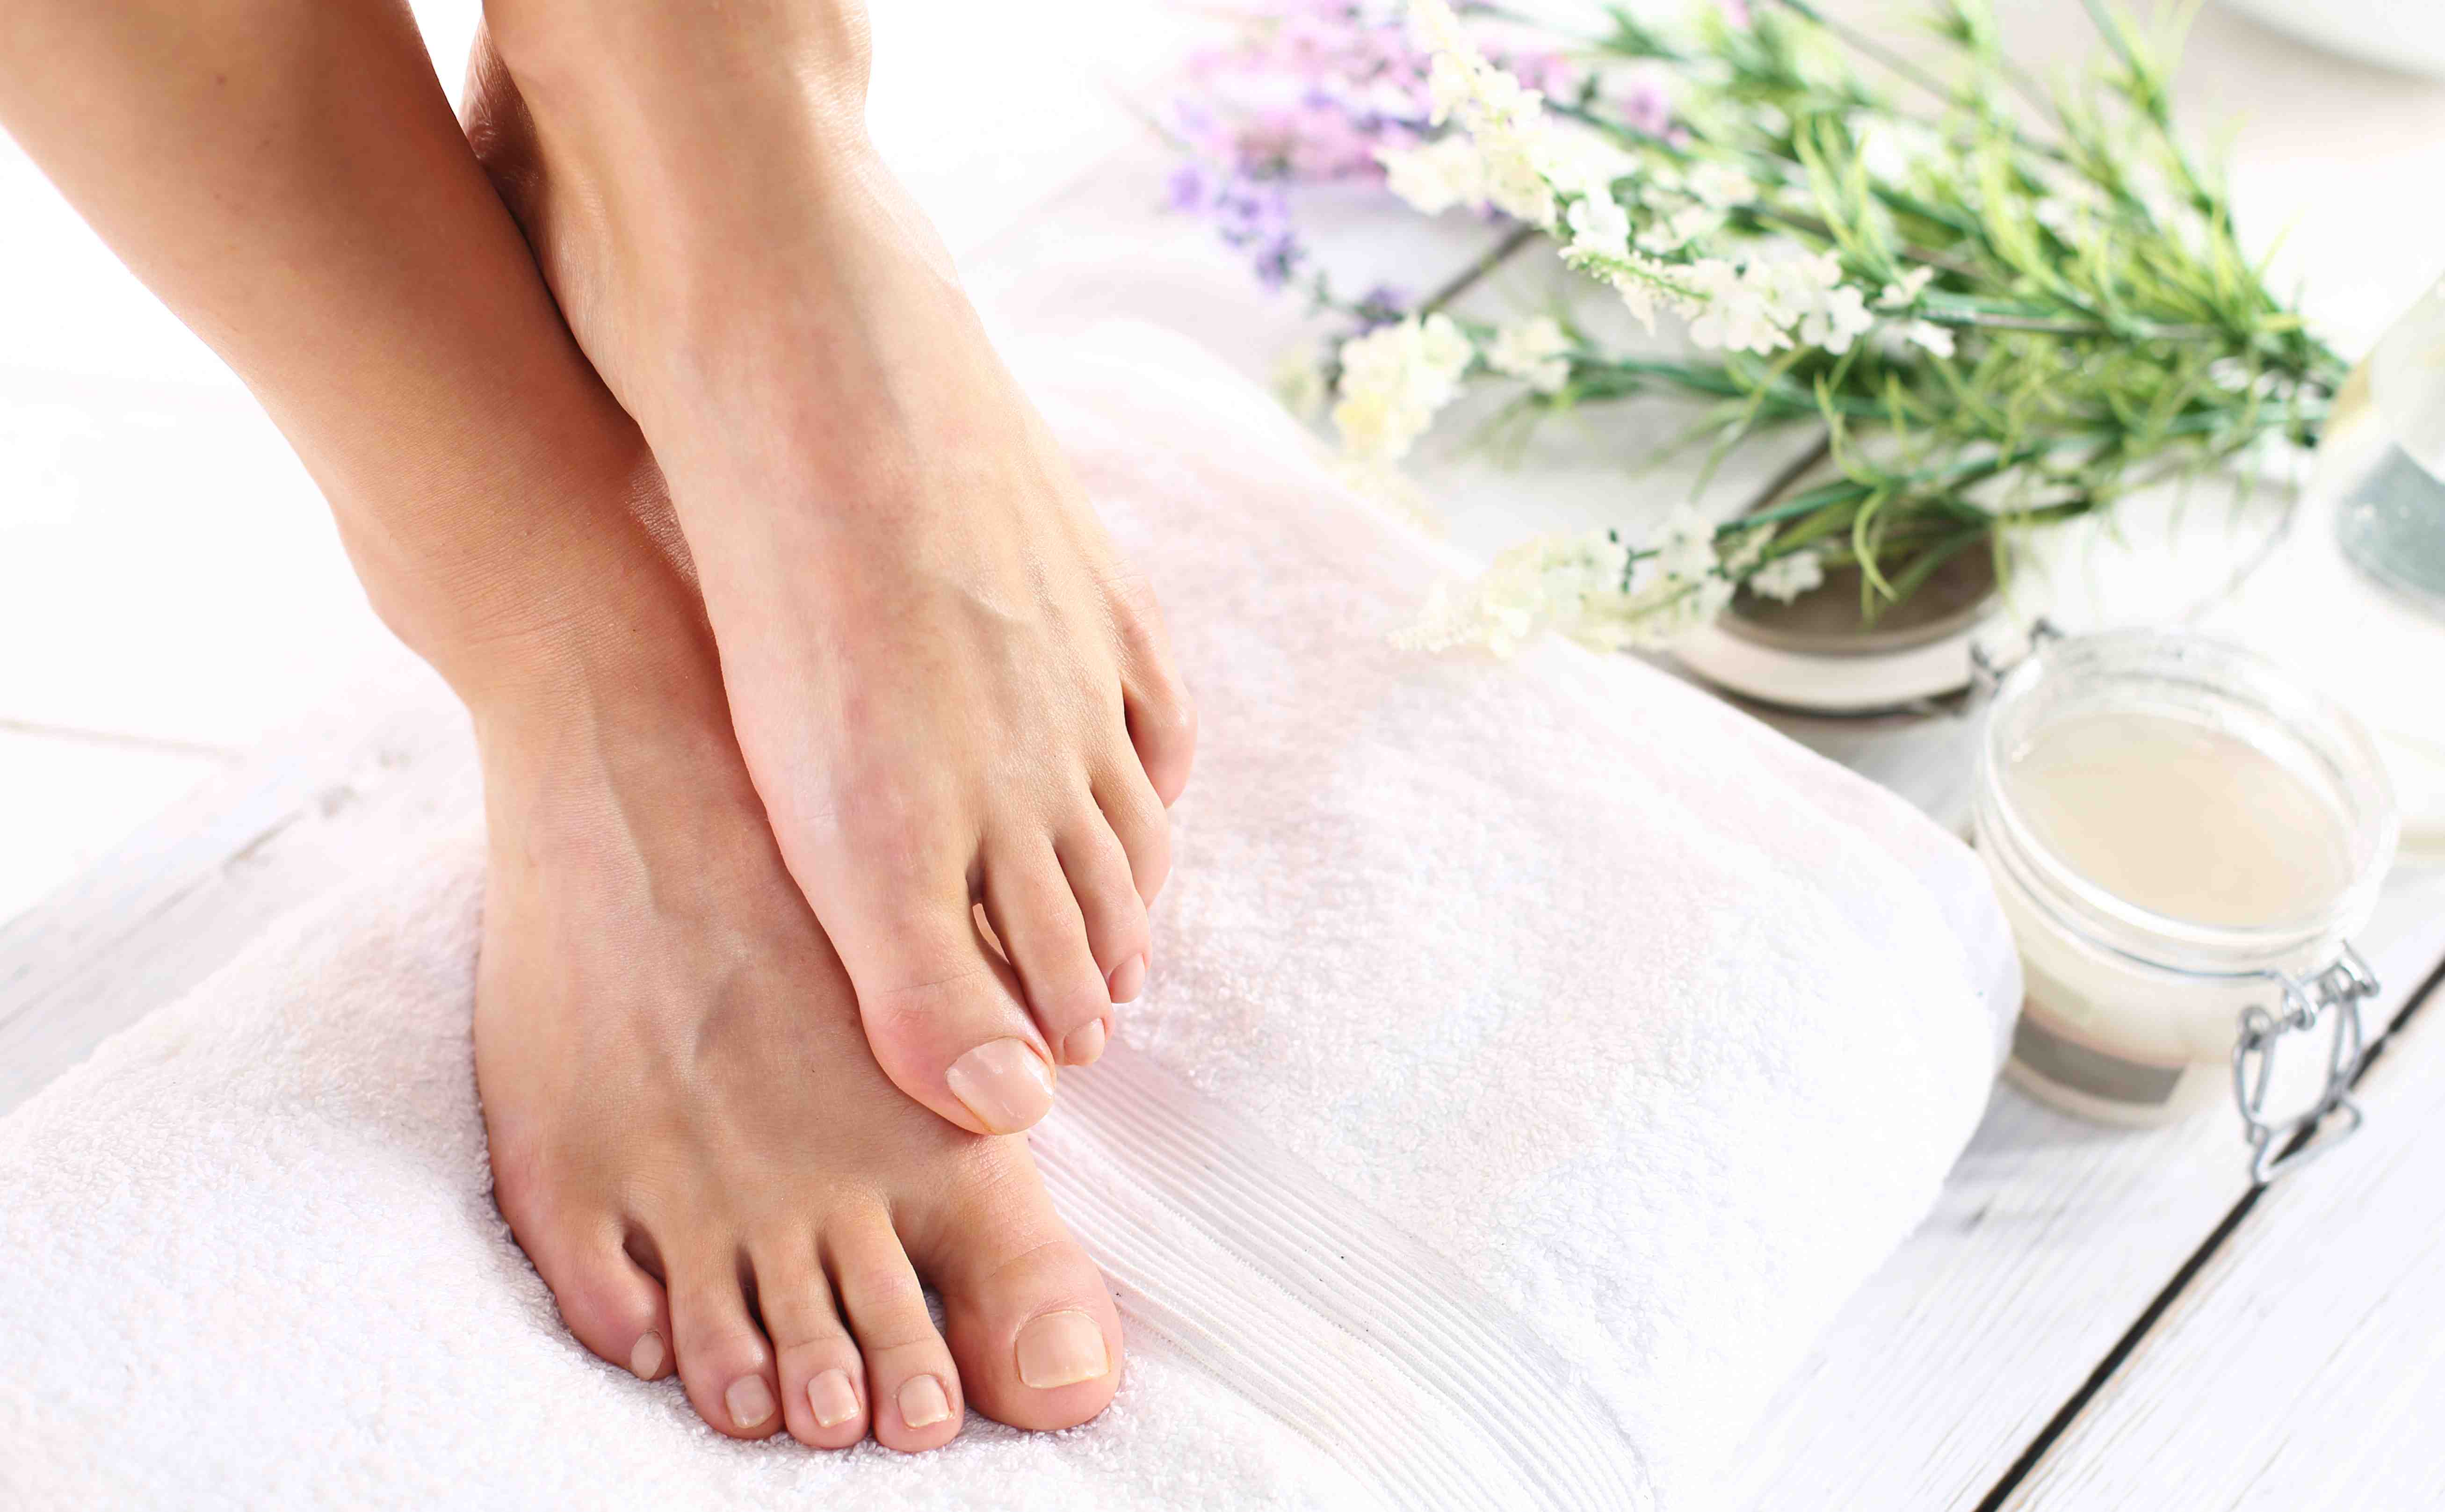 Toenail Fungal Infection and Its Treatment